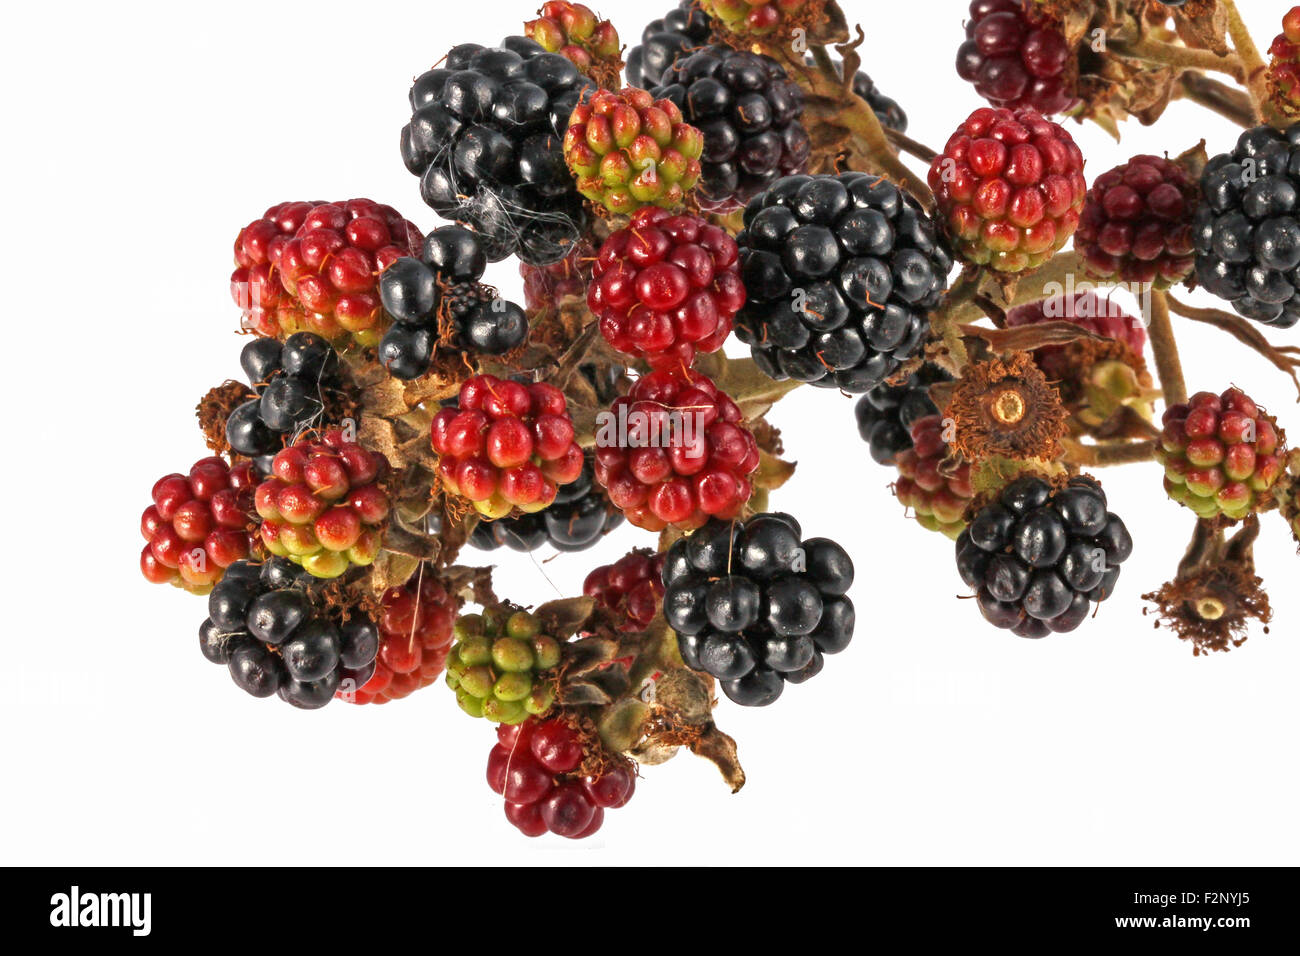 Bunch of blackberries on a plain white background. Stock Photo